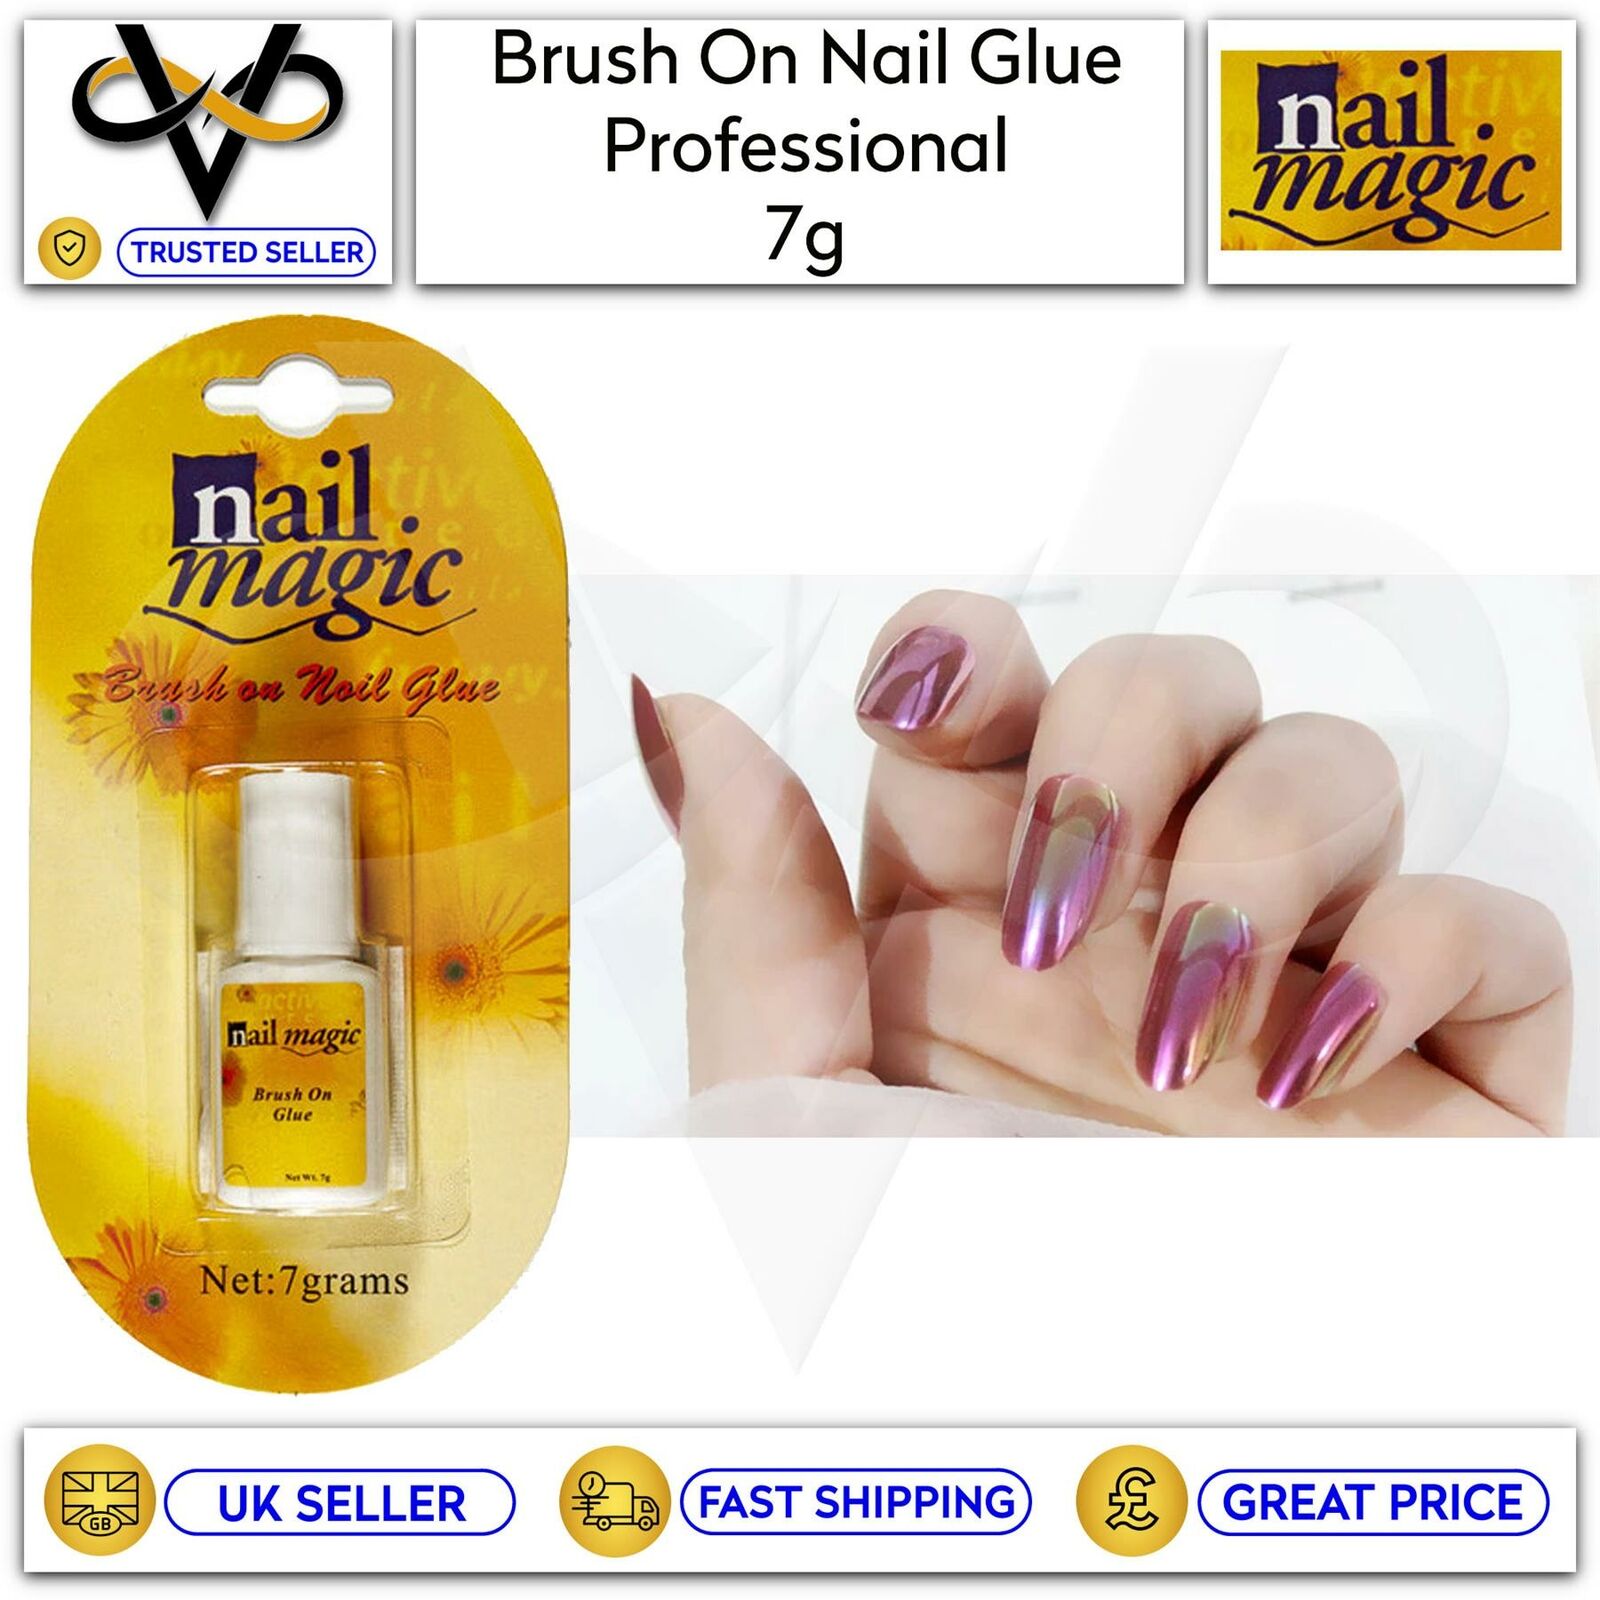 Nail care on the go all summer long – Manucurist